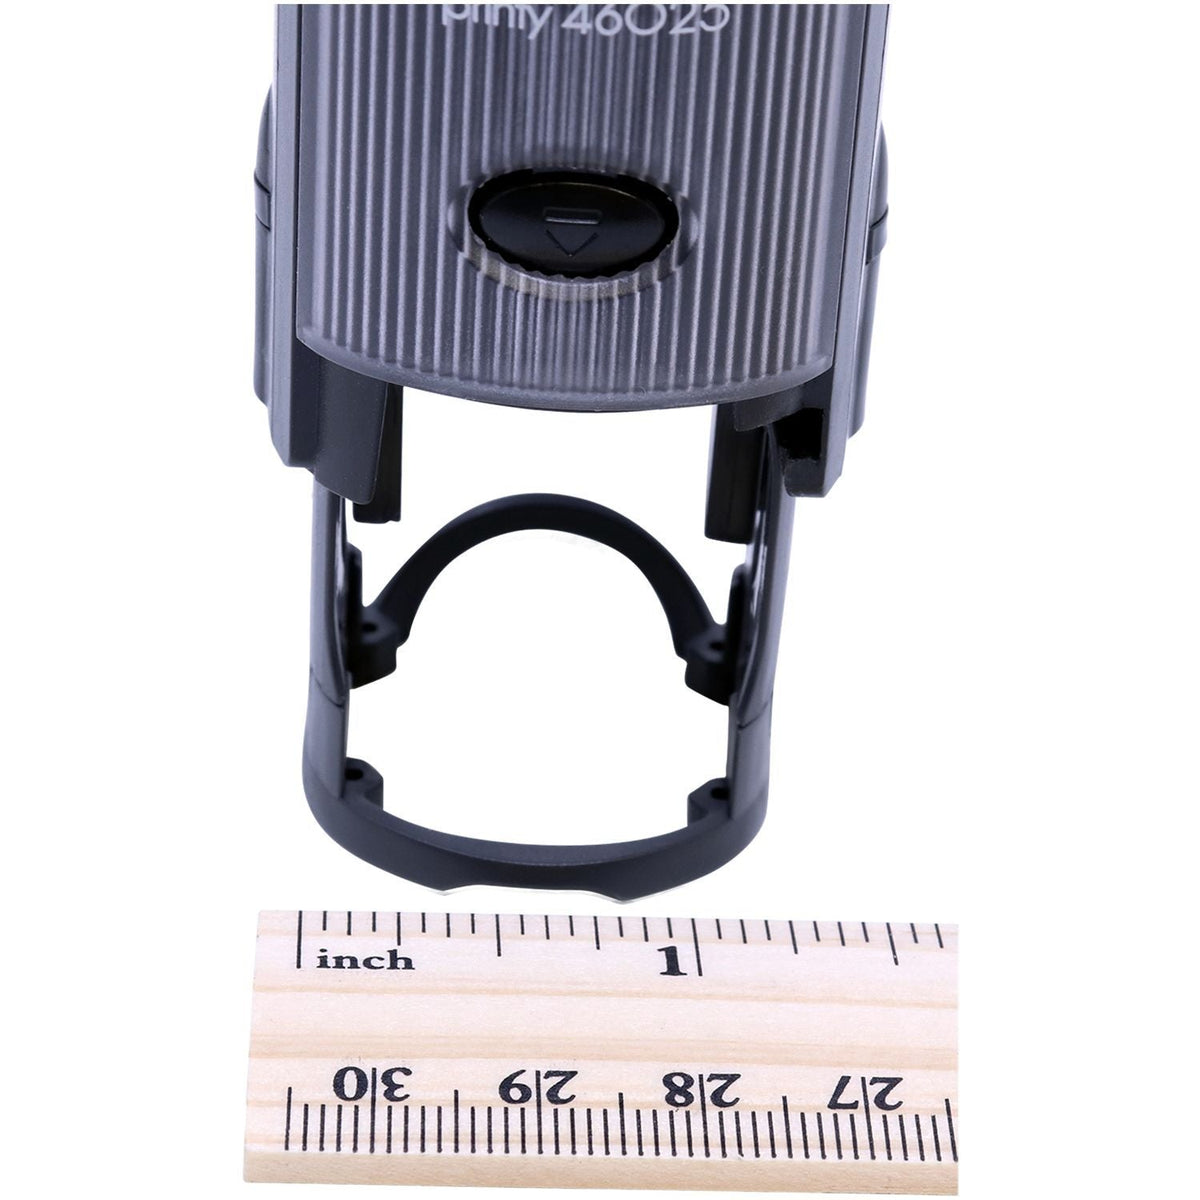 Measurment of Self-Inking Round First Class Stamp with Ruler